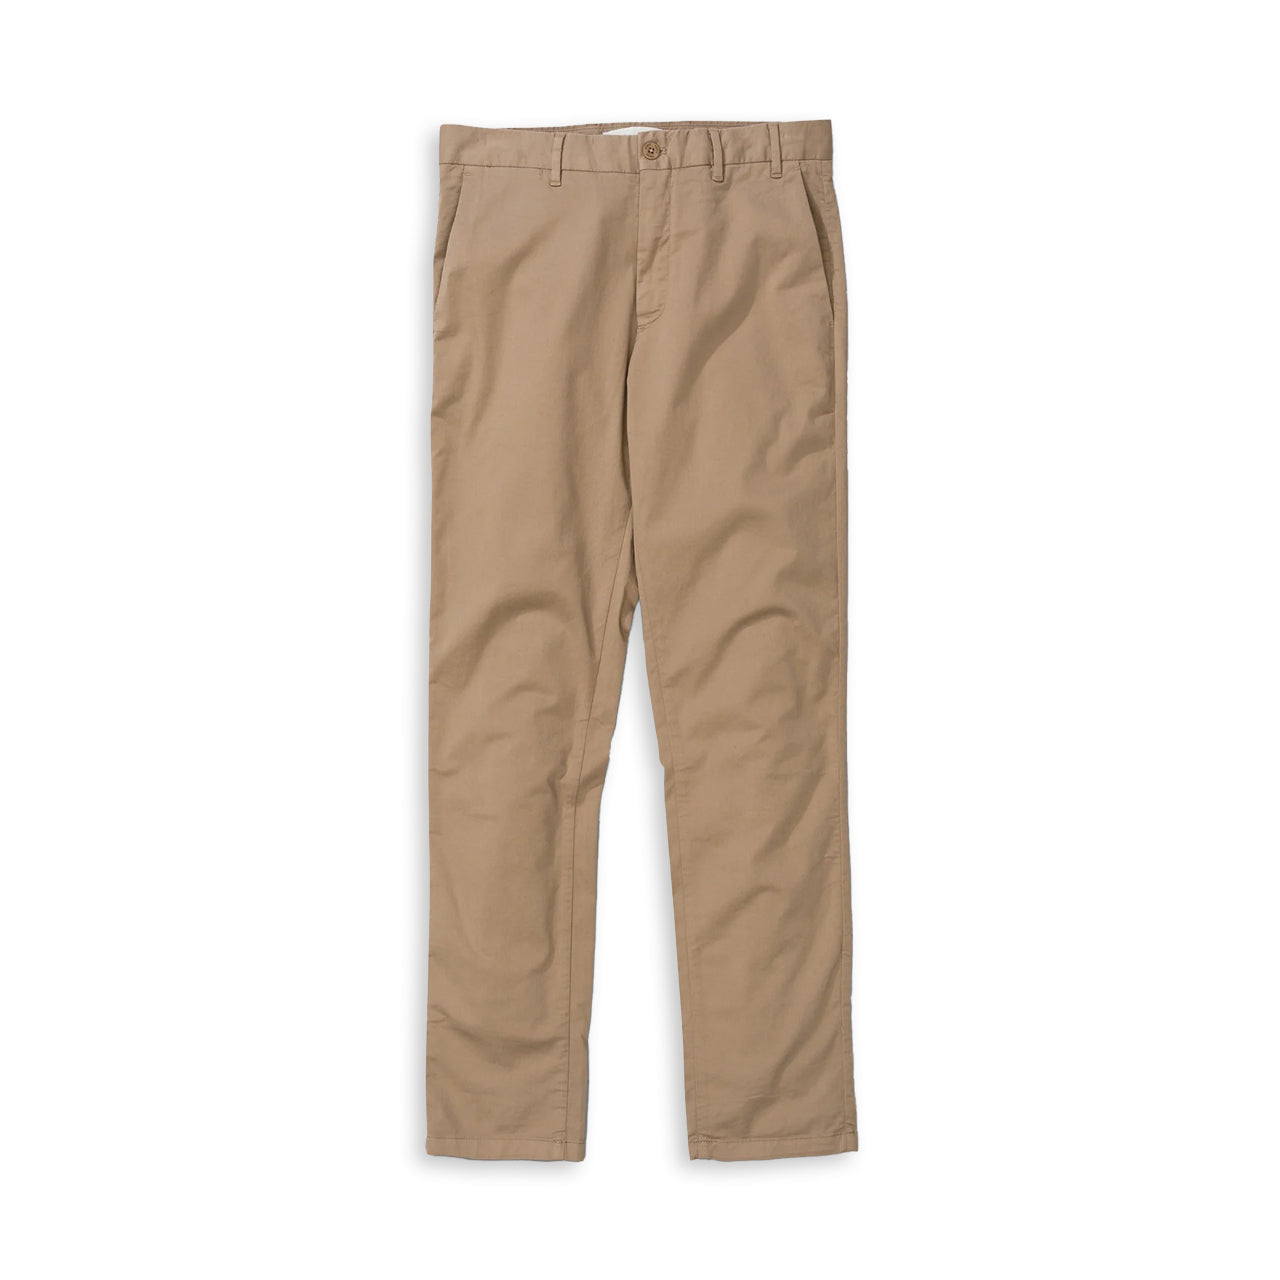 Norse Projects Aros Slim Light Stretch Chinos